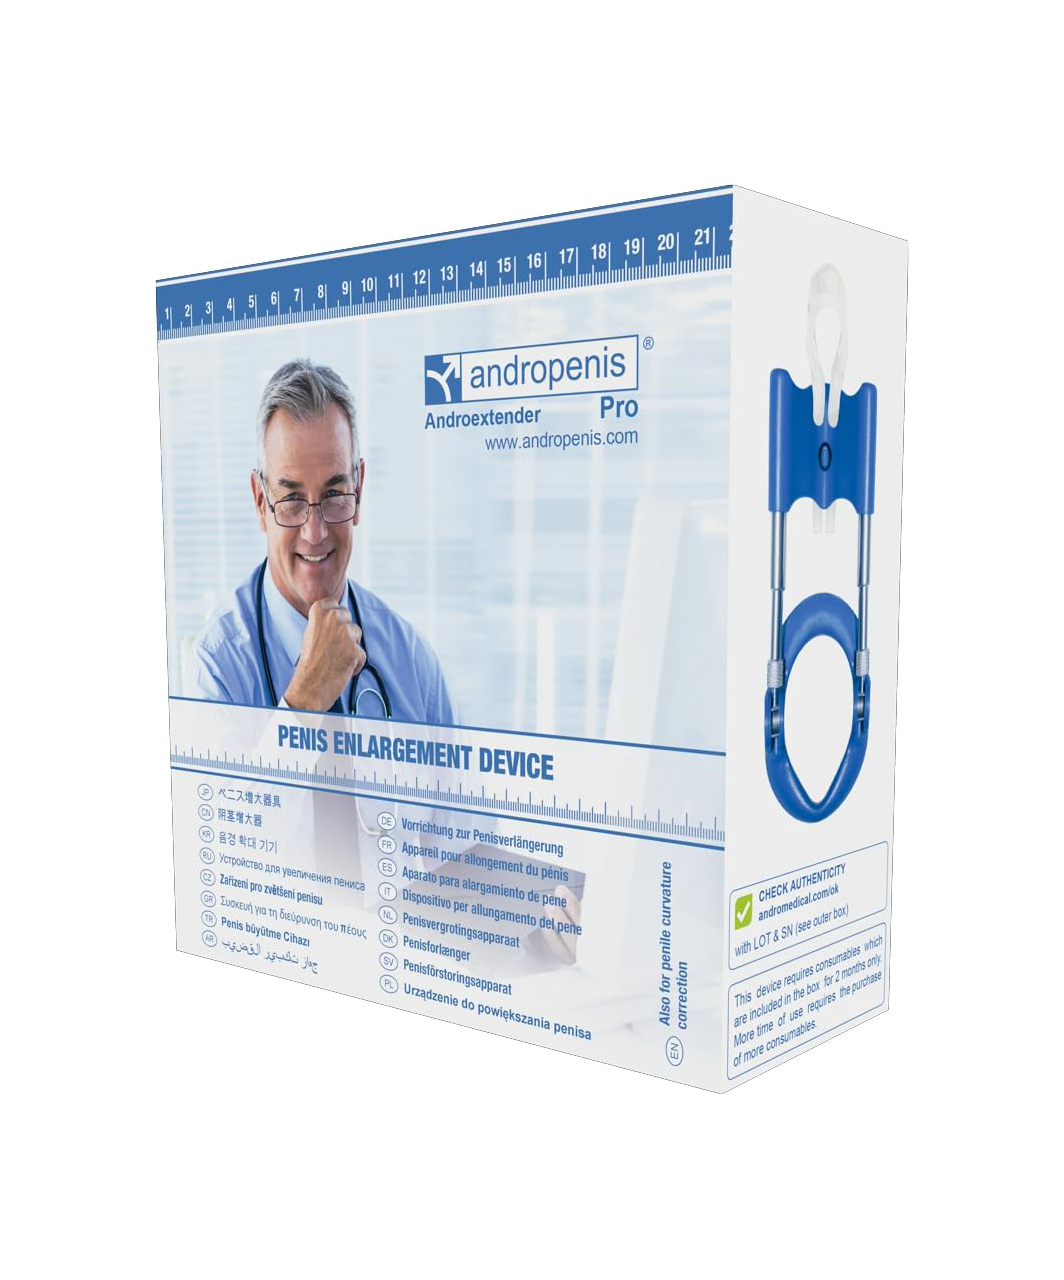 Andromedical Andropenis Pro Androextender